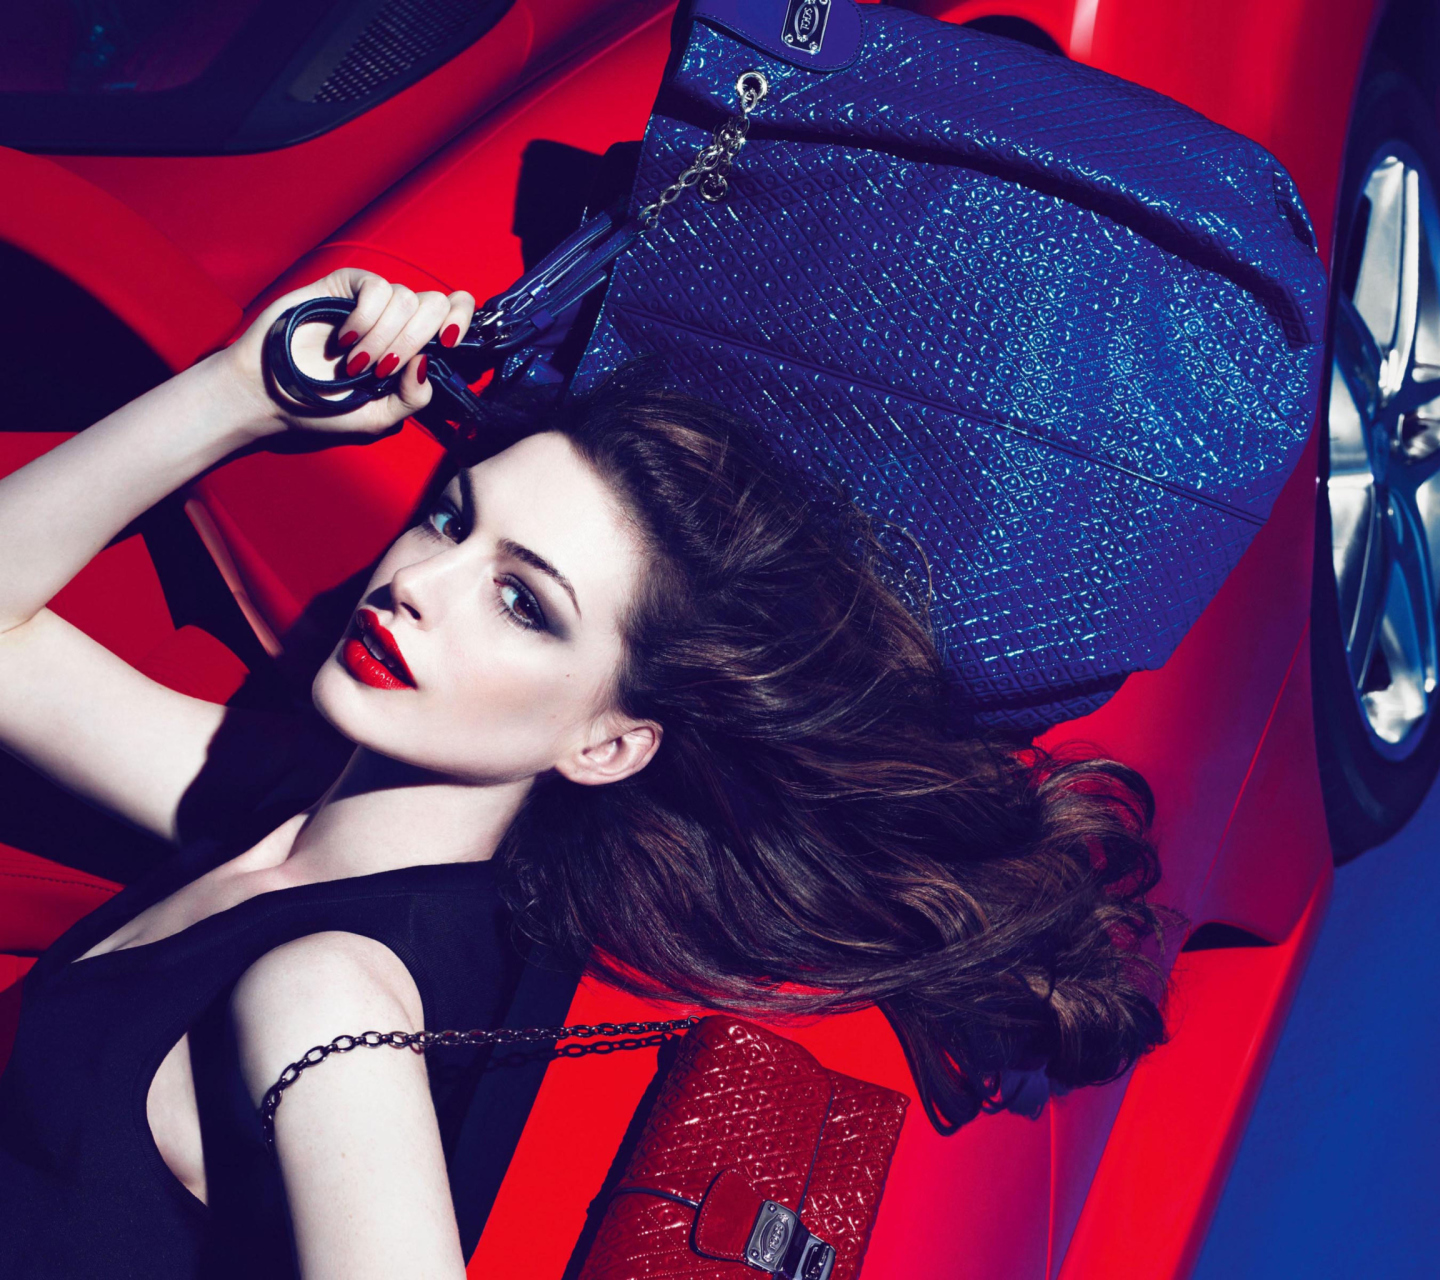 Anne Hathaway For Tods screenshot #1 1440x1280